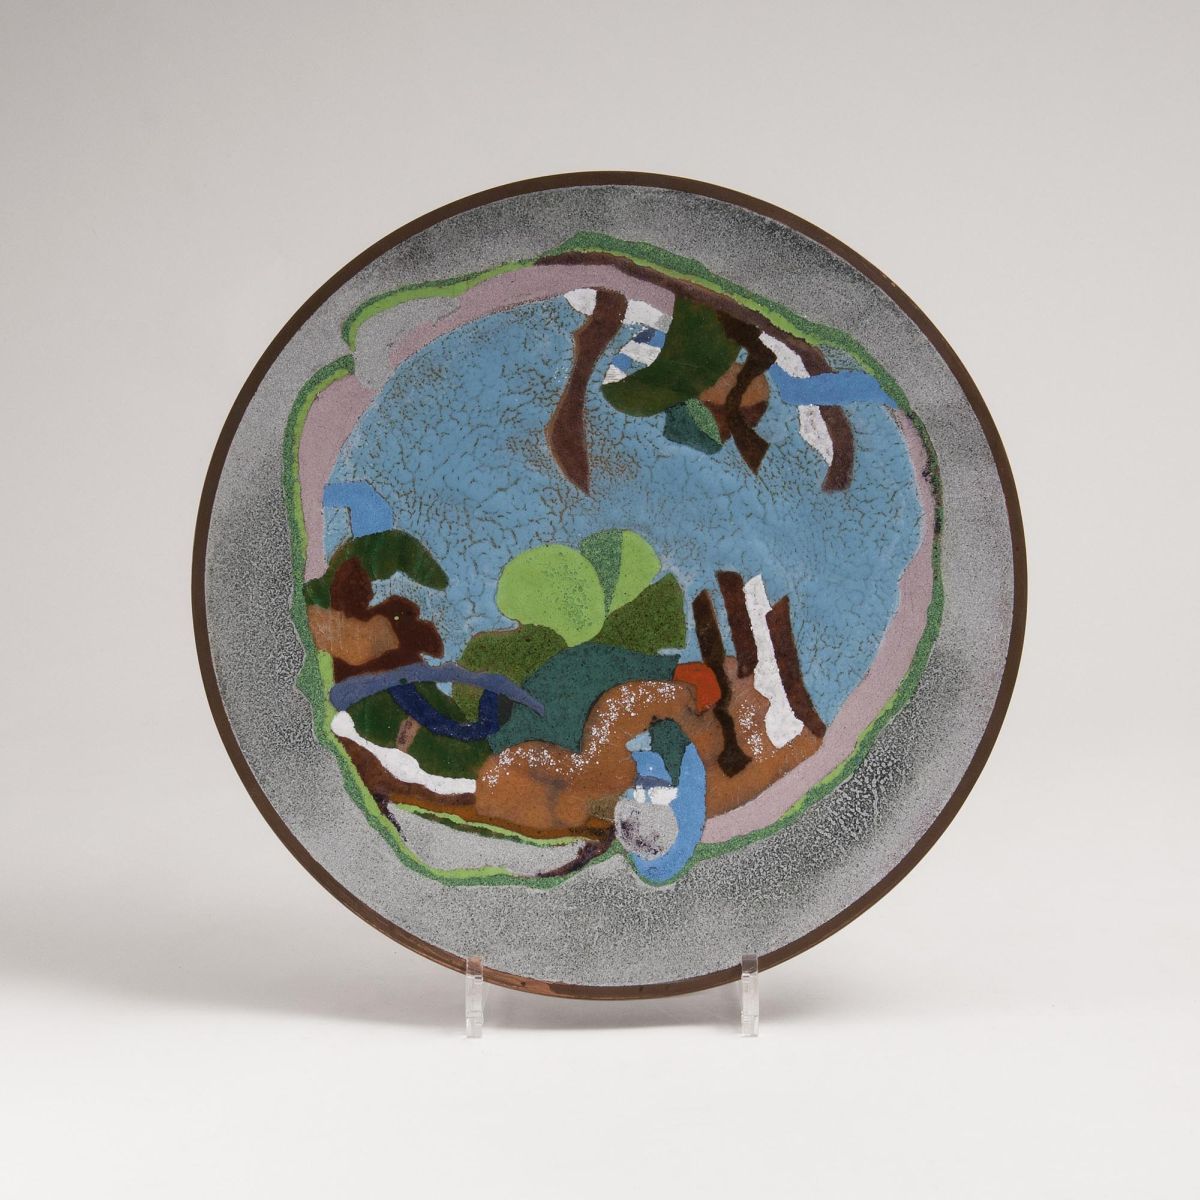 An Enameled Plate with Landscape Painting